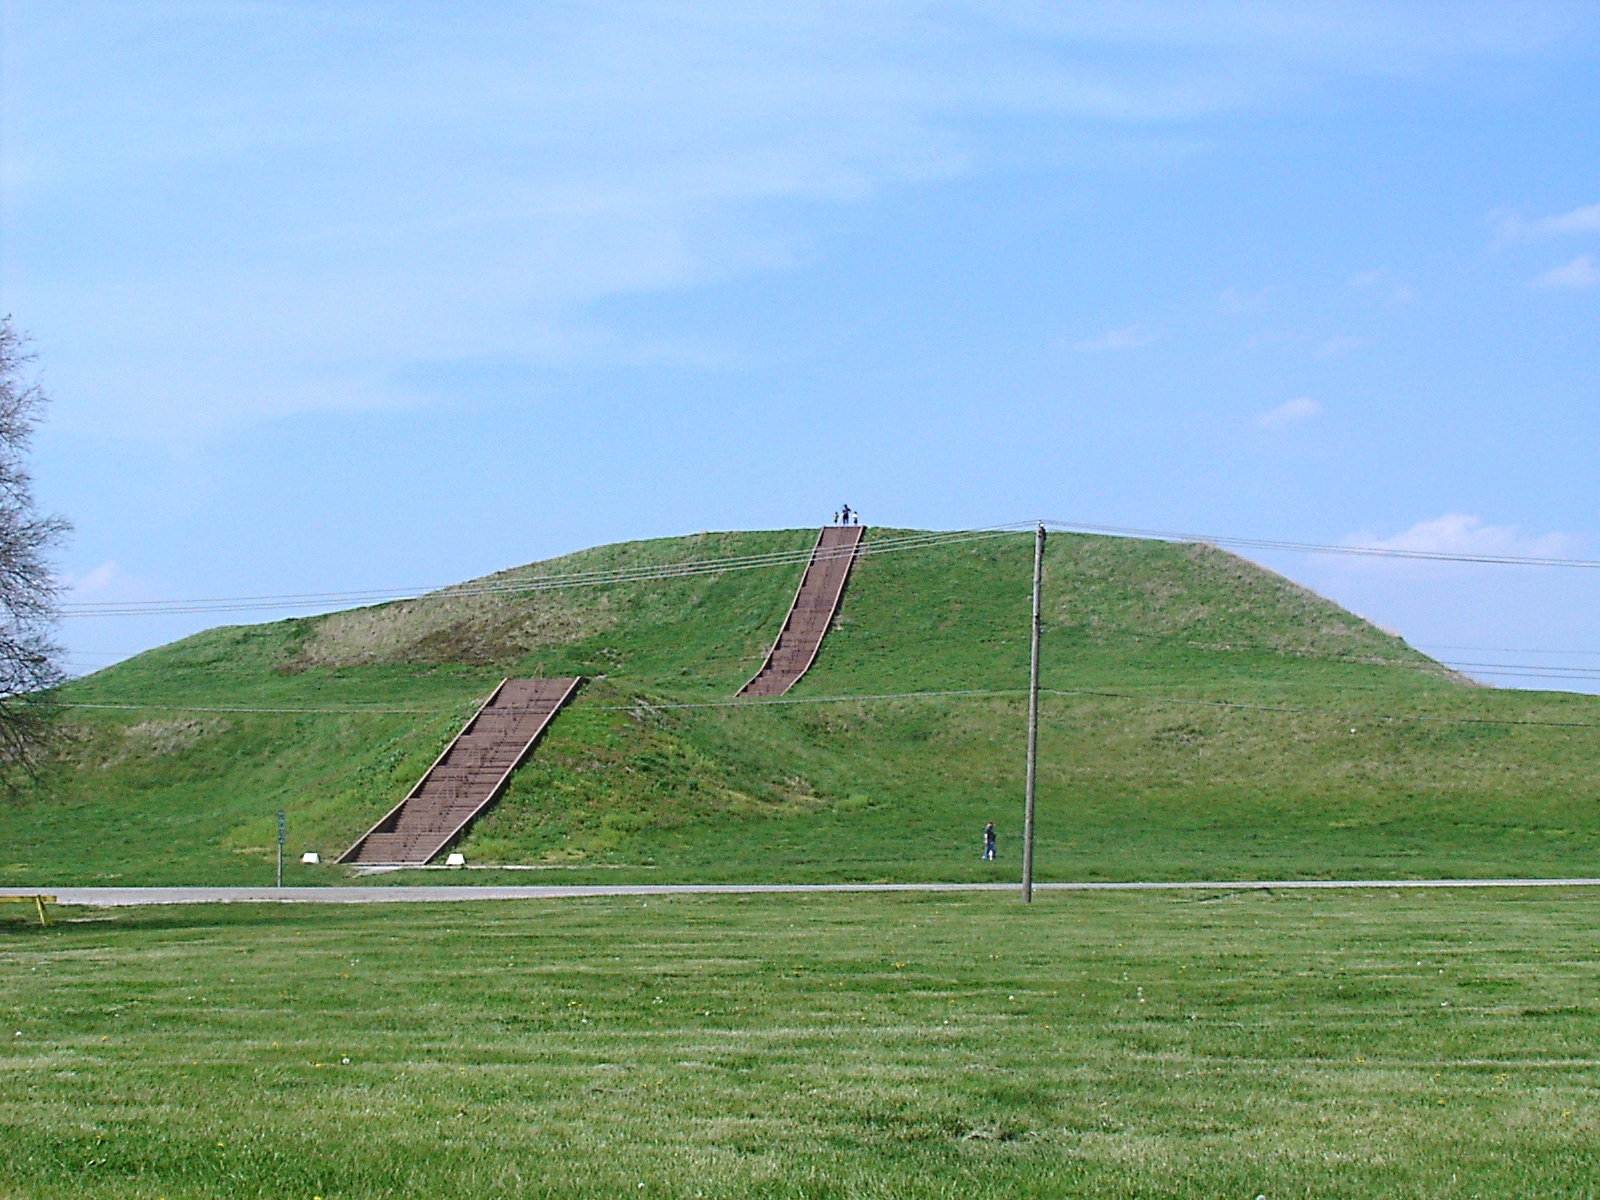 Monks Mound at Cahokia. Thousands of years ago, this pyramidal structure was one of the main buildings in the city. Image Credit: Wikimedia Commons / CC BY-SA 3.0.